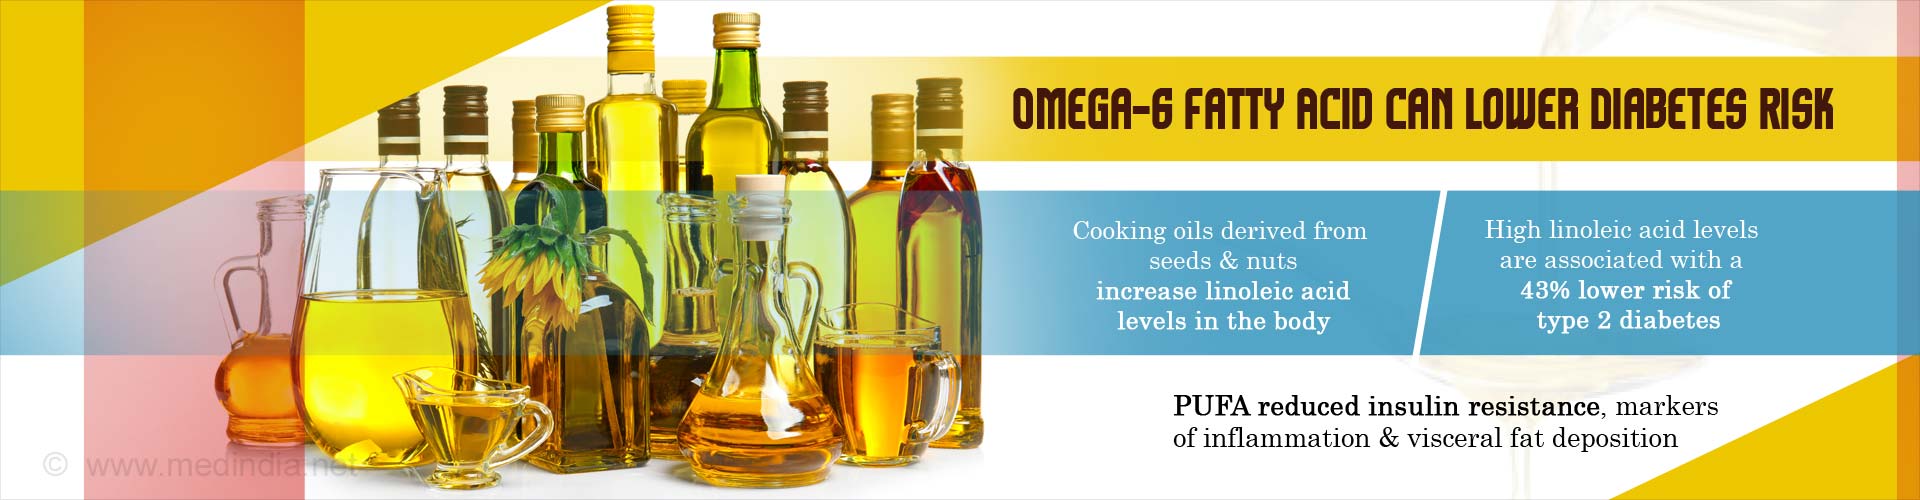 Omega-6 Fatty Acid Can Lower Diabetes Risk
- Cooking oils derived from acids & nuts increase linoleic acid levels in the body
- High linoleic acid levels are associated with a 43% lower risk of type 2 diabetes
- PUFA reduced insulin resistance, markers of inflammation & visceral fat deposition